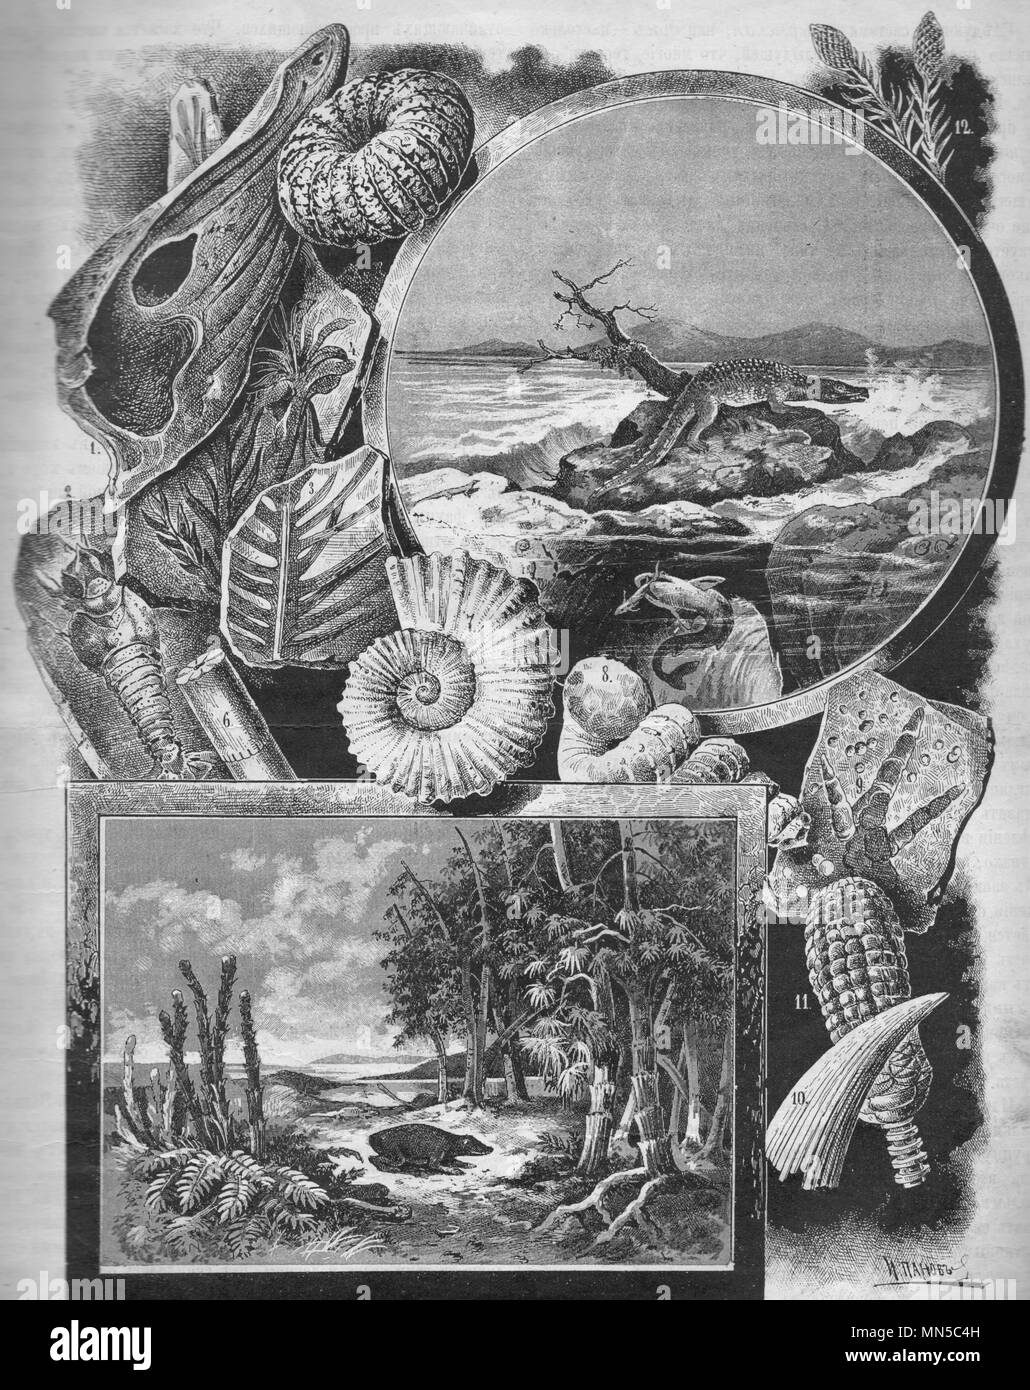 Fossils. Vintage engraved illustration. Published in magazine in 1900. Stock Photo